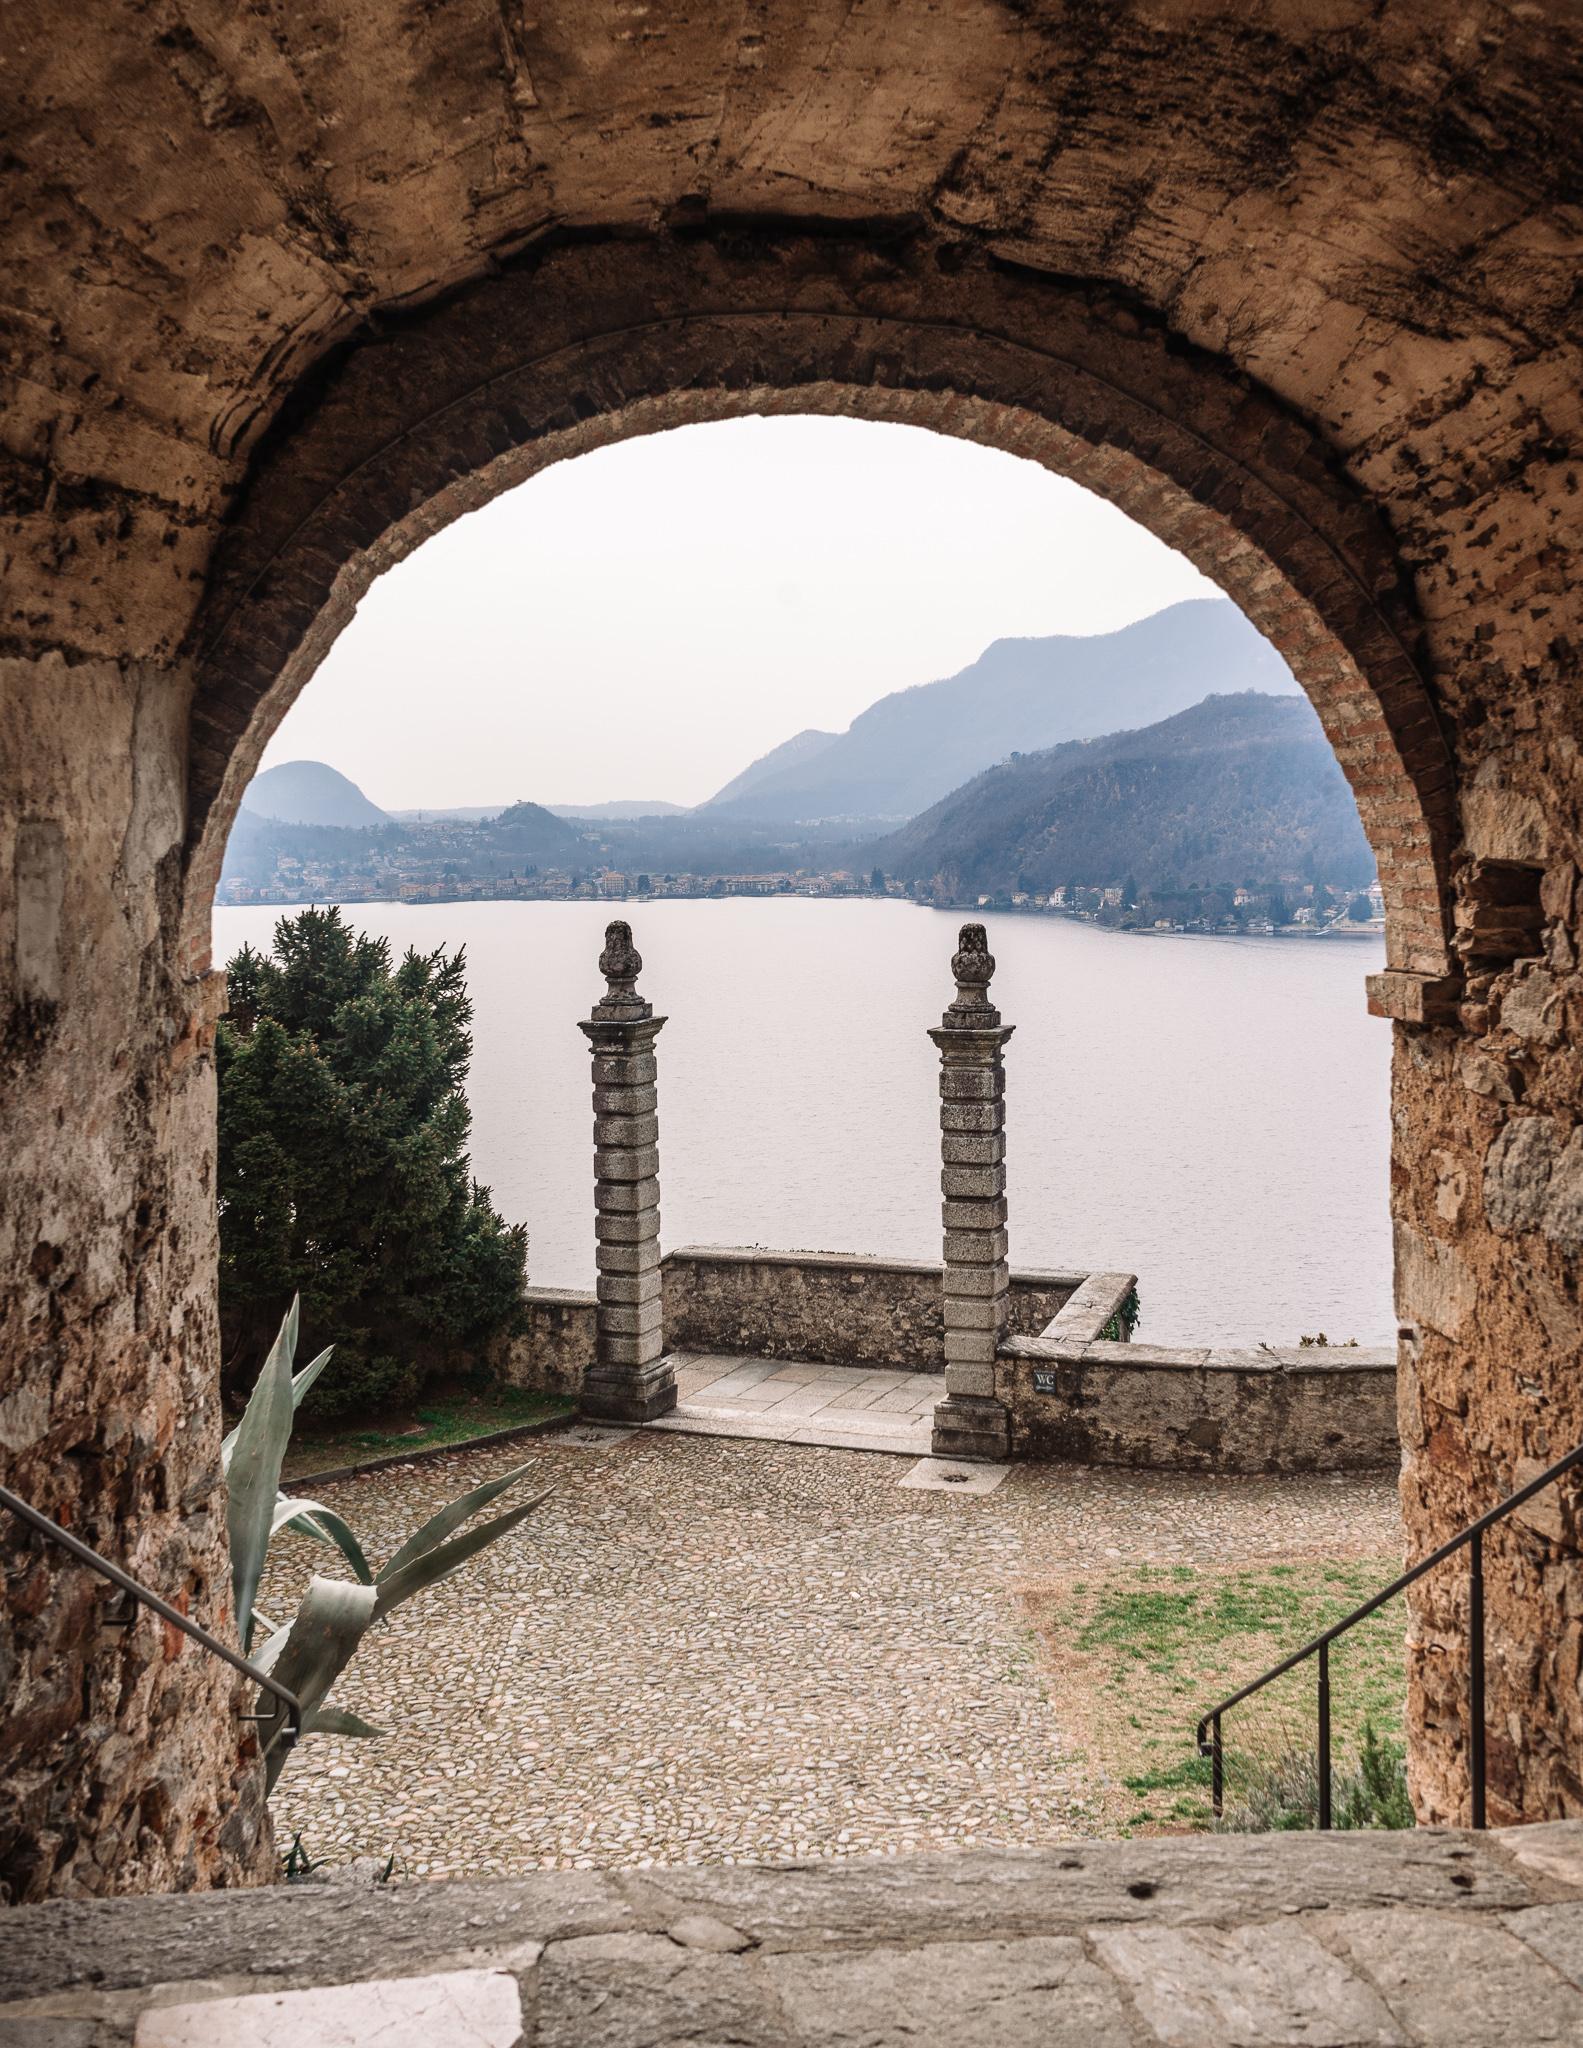 Archway with view of Lake Lugano beyond in Morcote, Ticino Switzerland